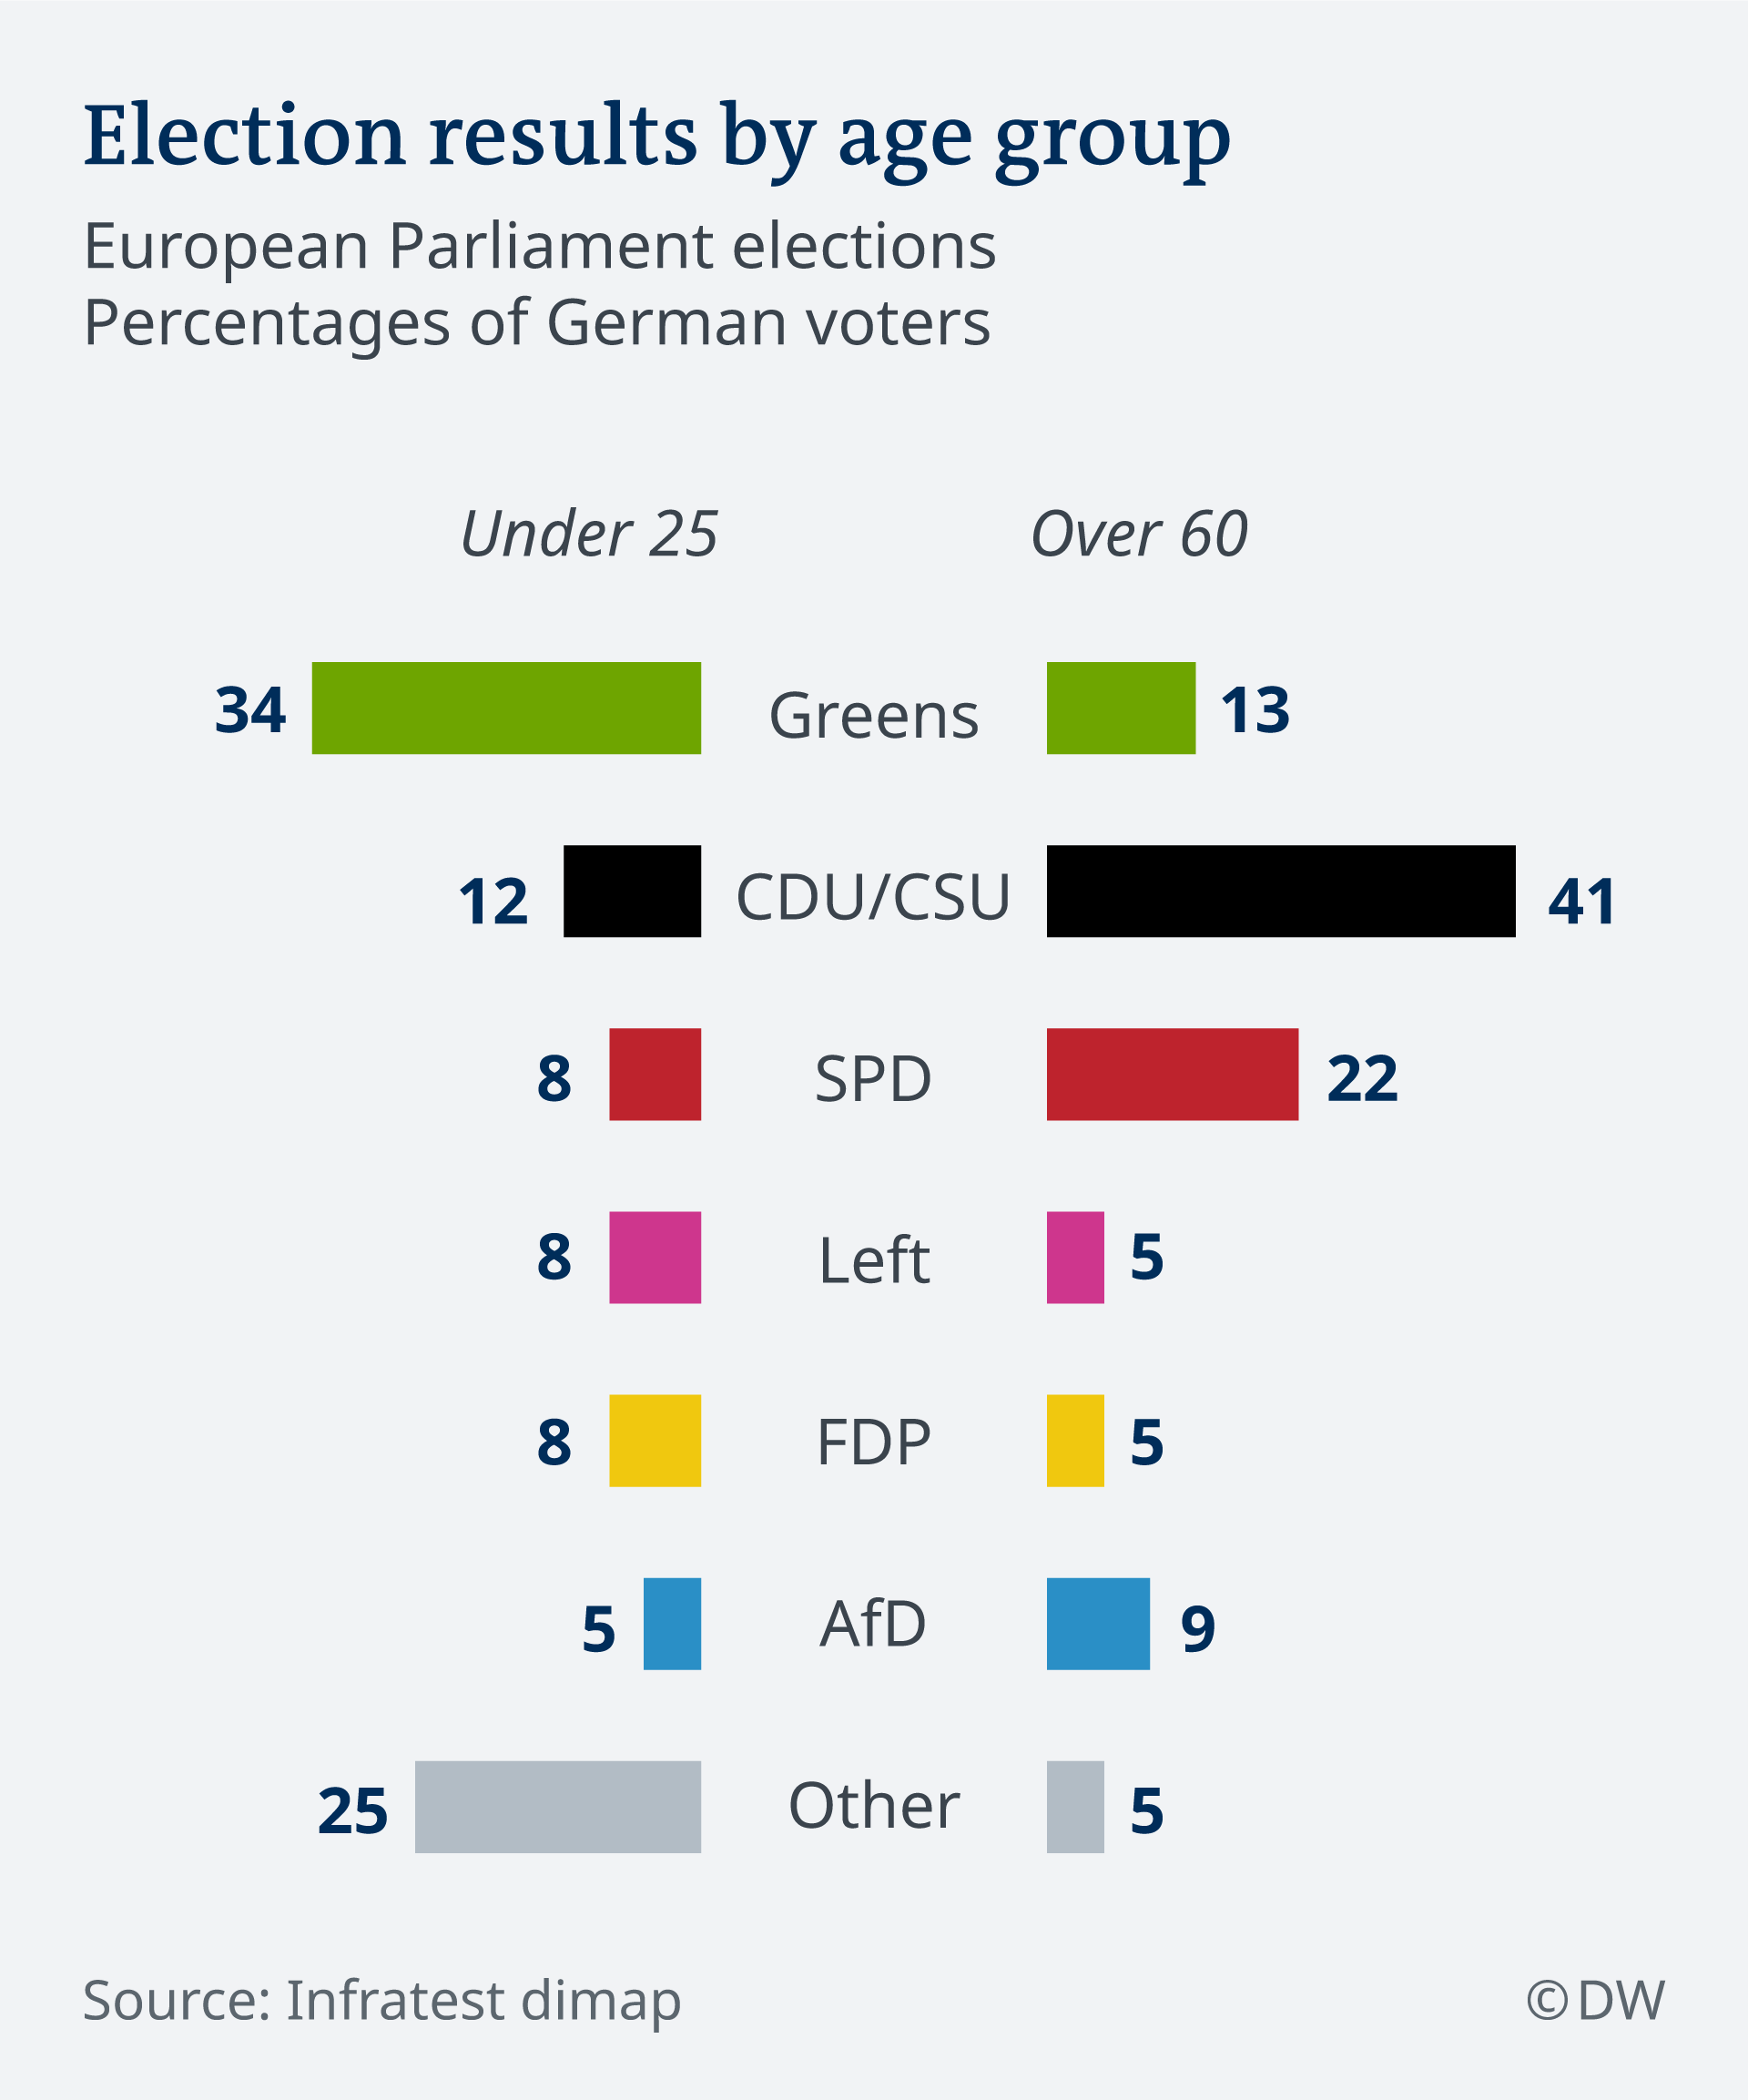 Electoral results according to age groups